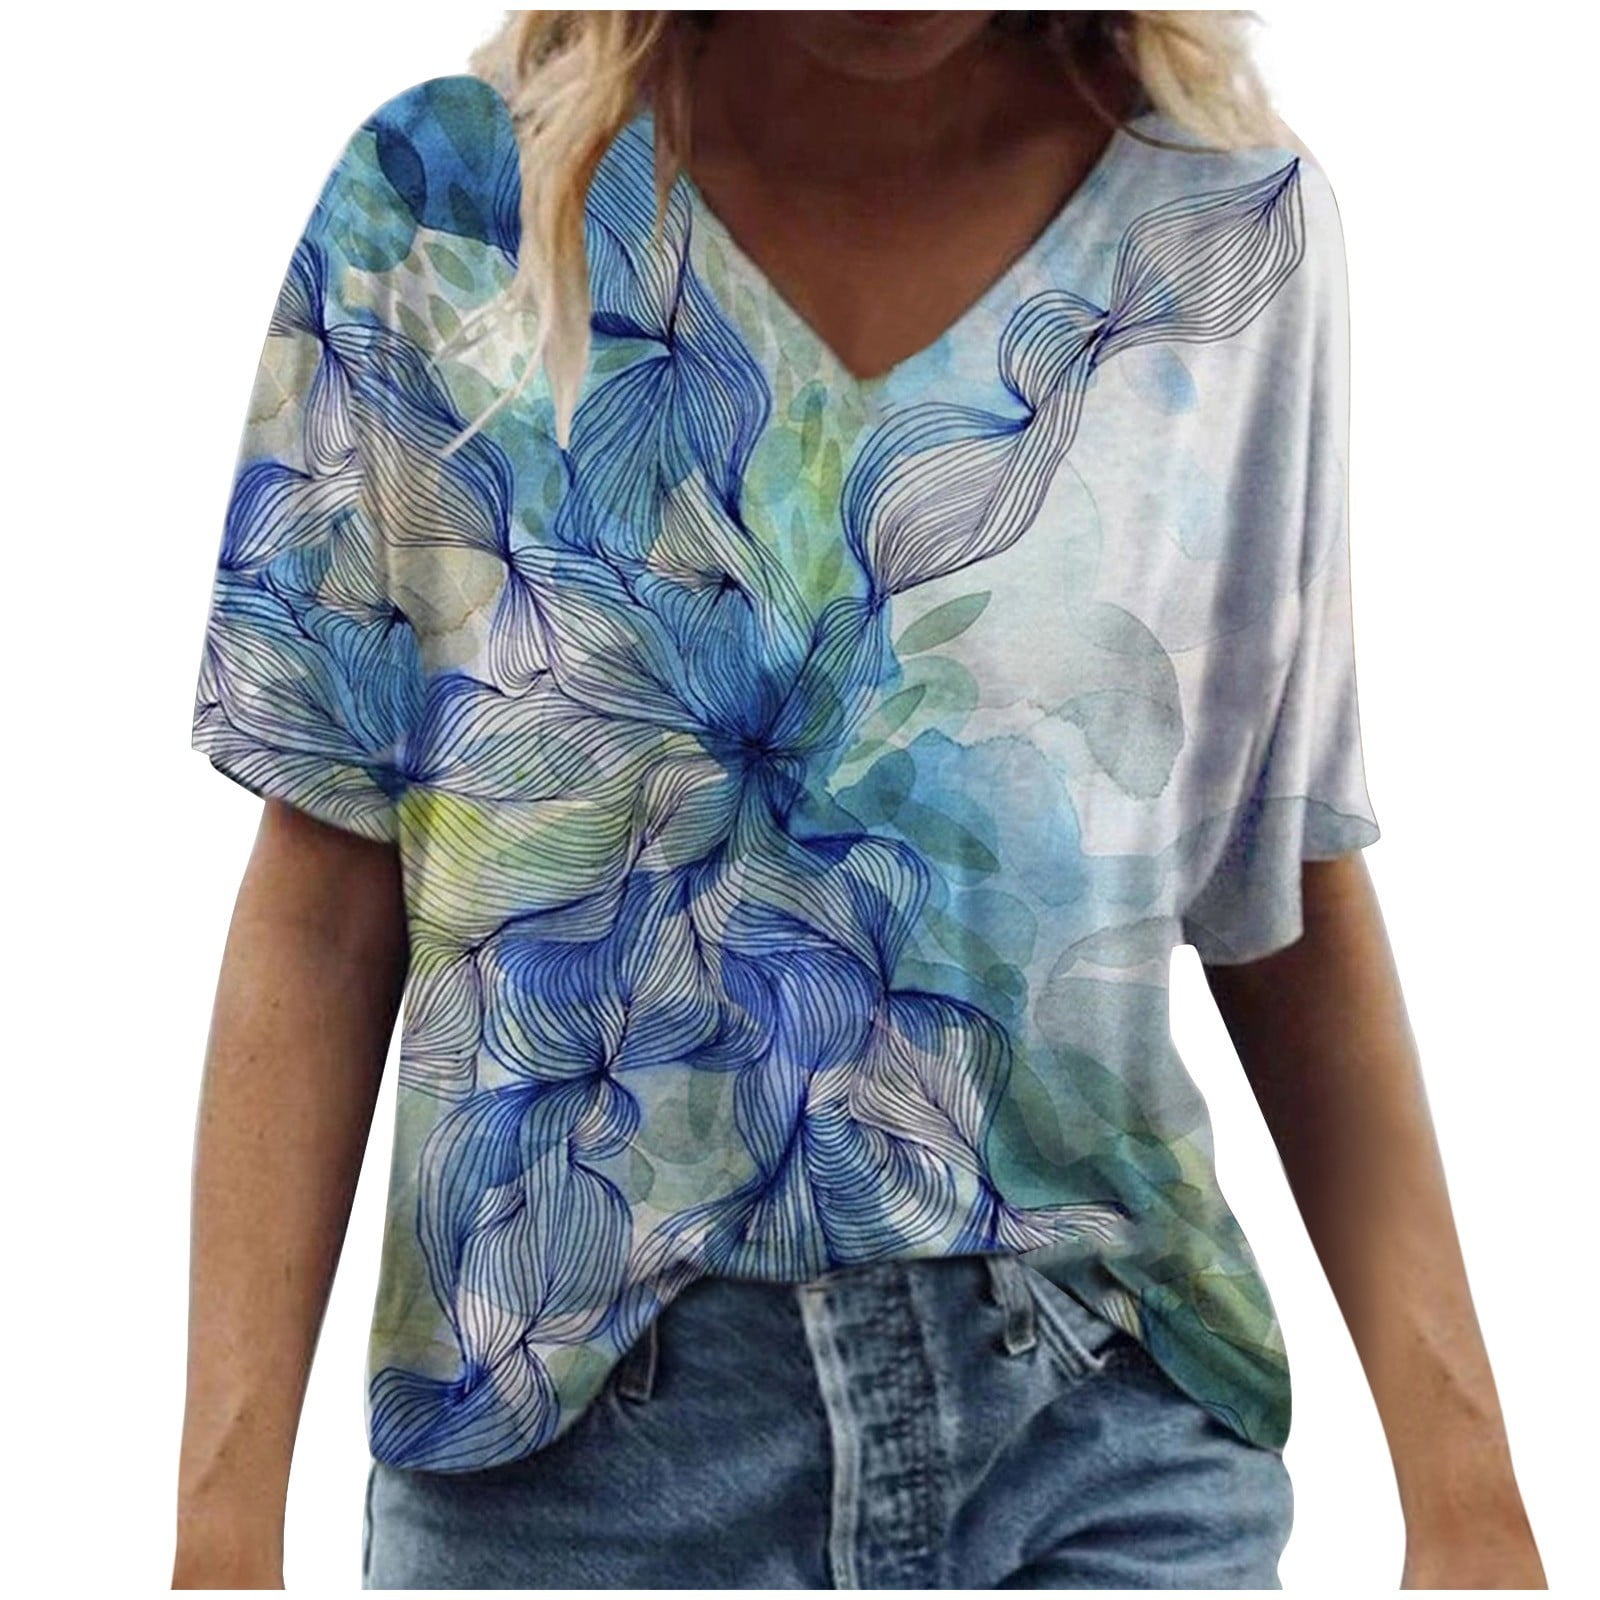 Womens Tops and Blouses Women's Fashion Casual Plus Size Scenic Flowers ...